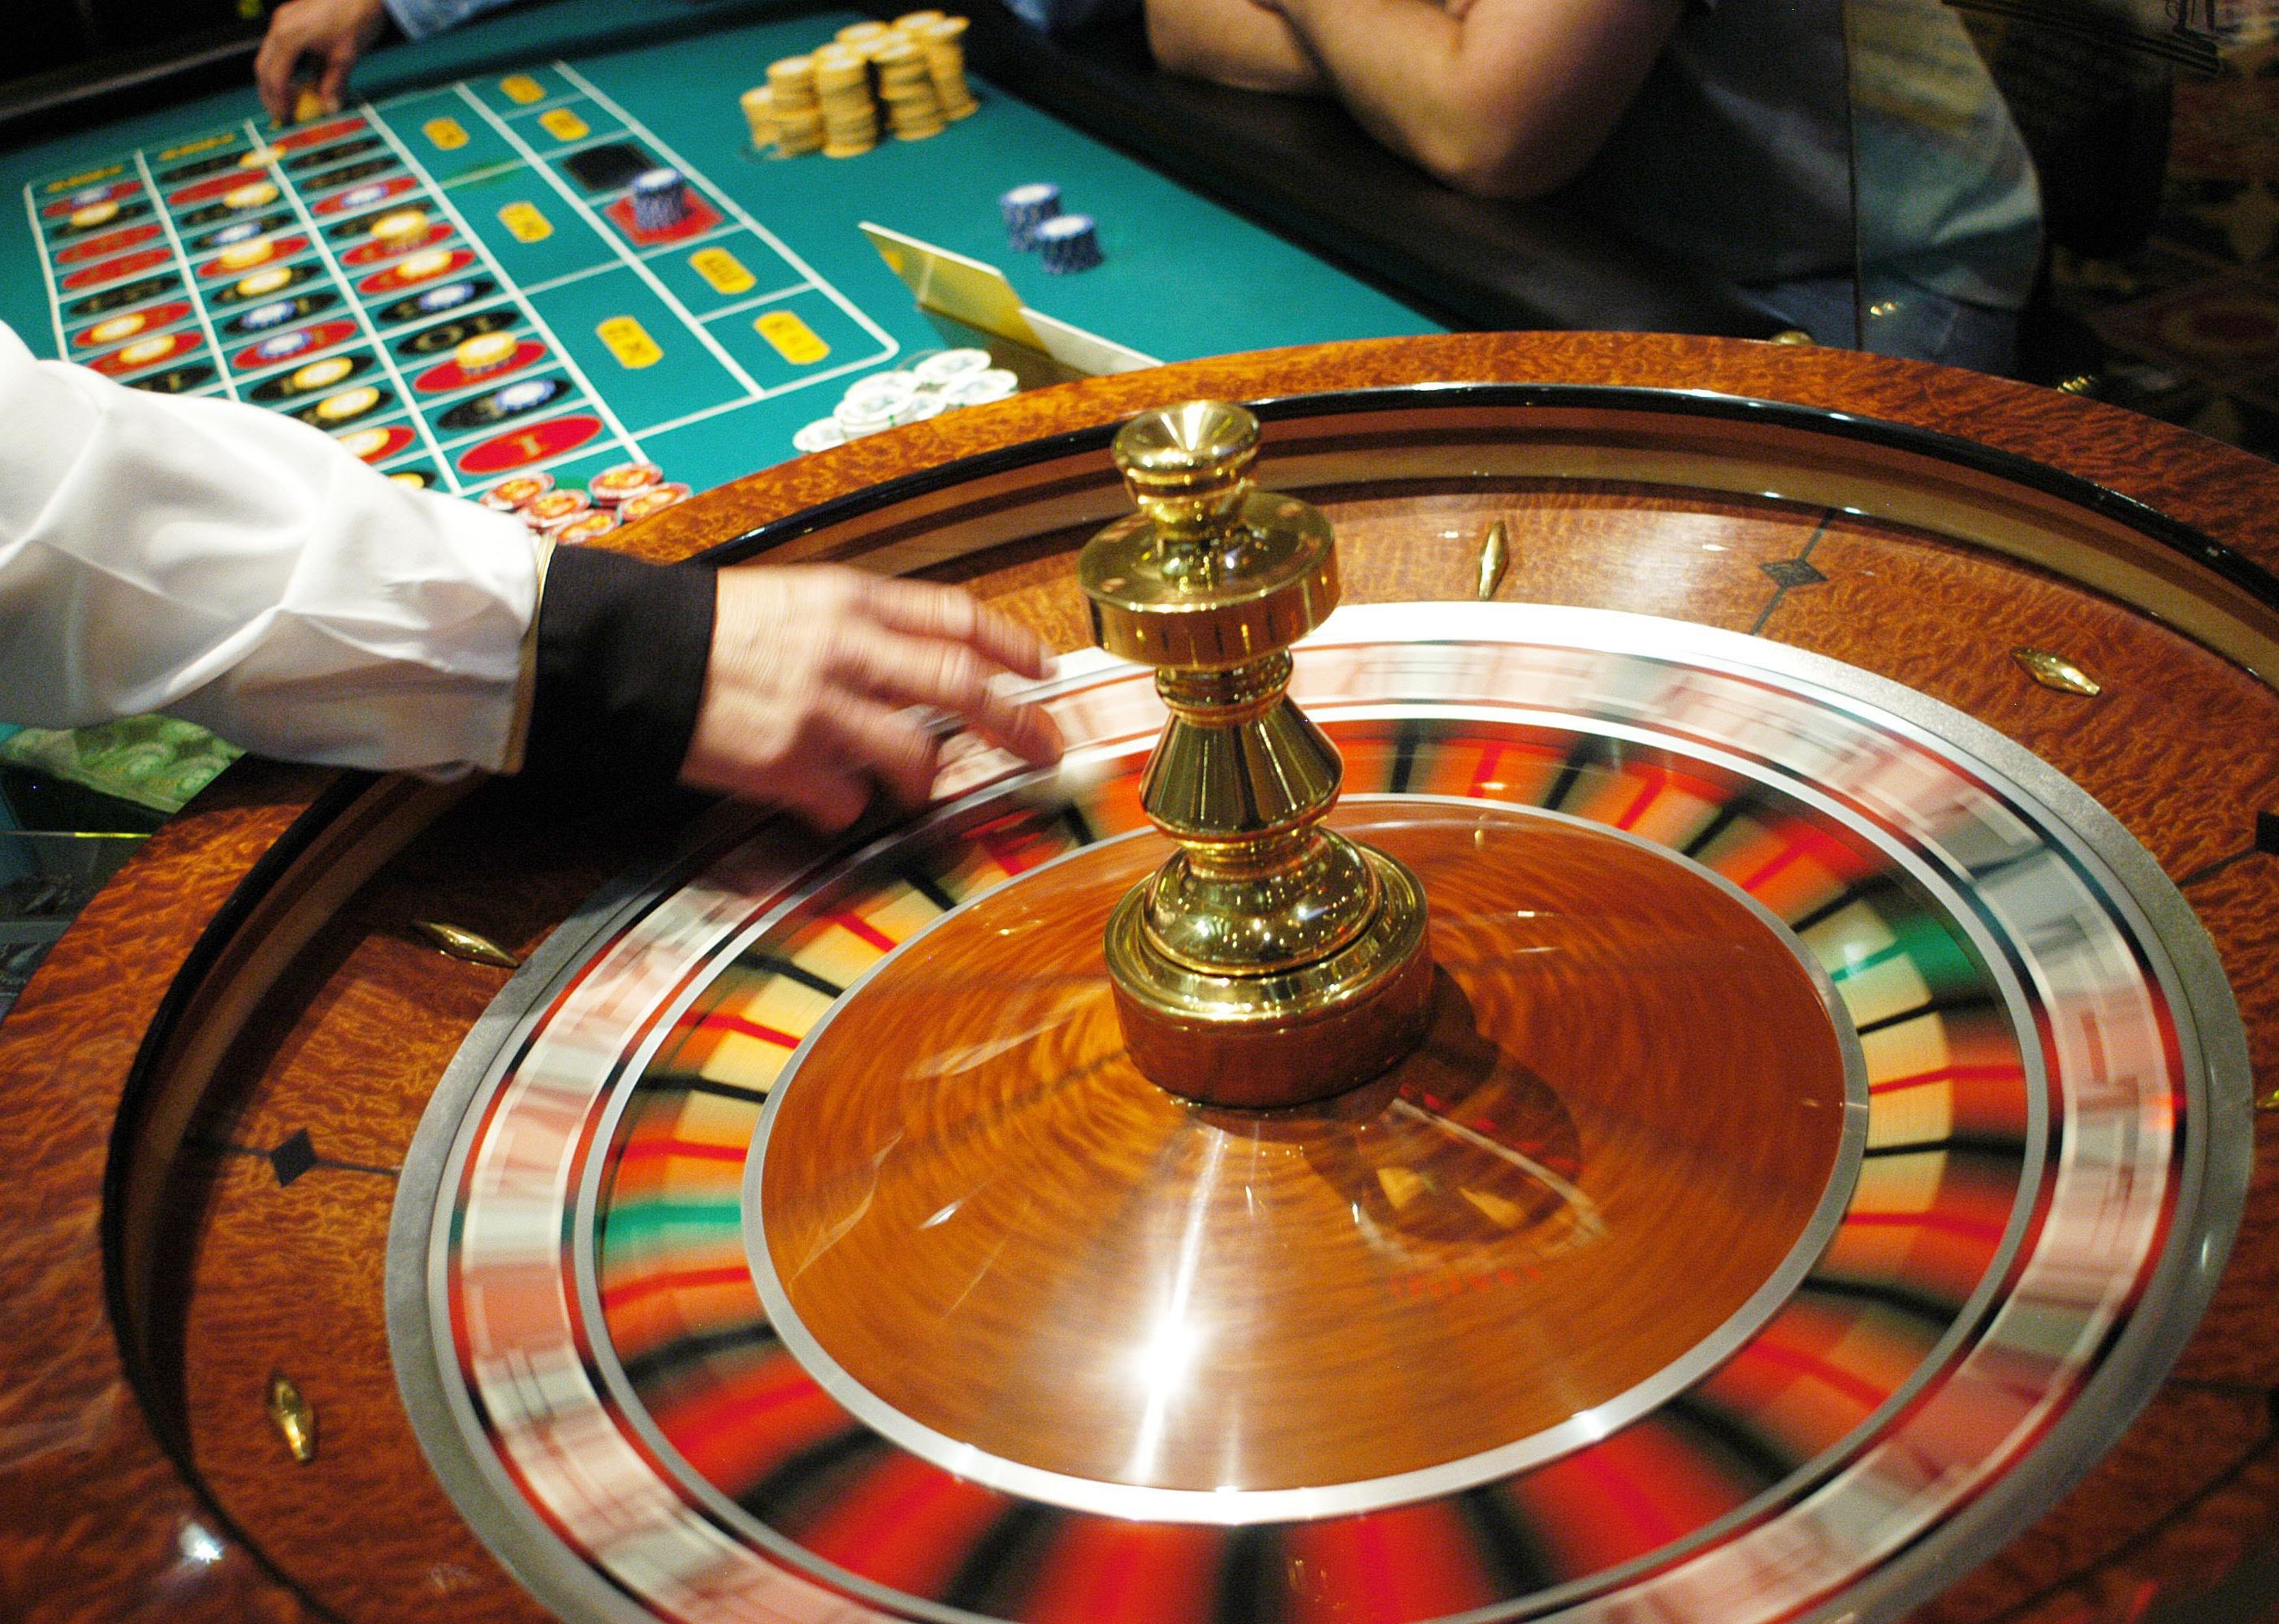 The roulette wheel spins at Caesars Atlantic City.